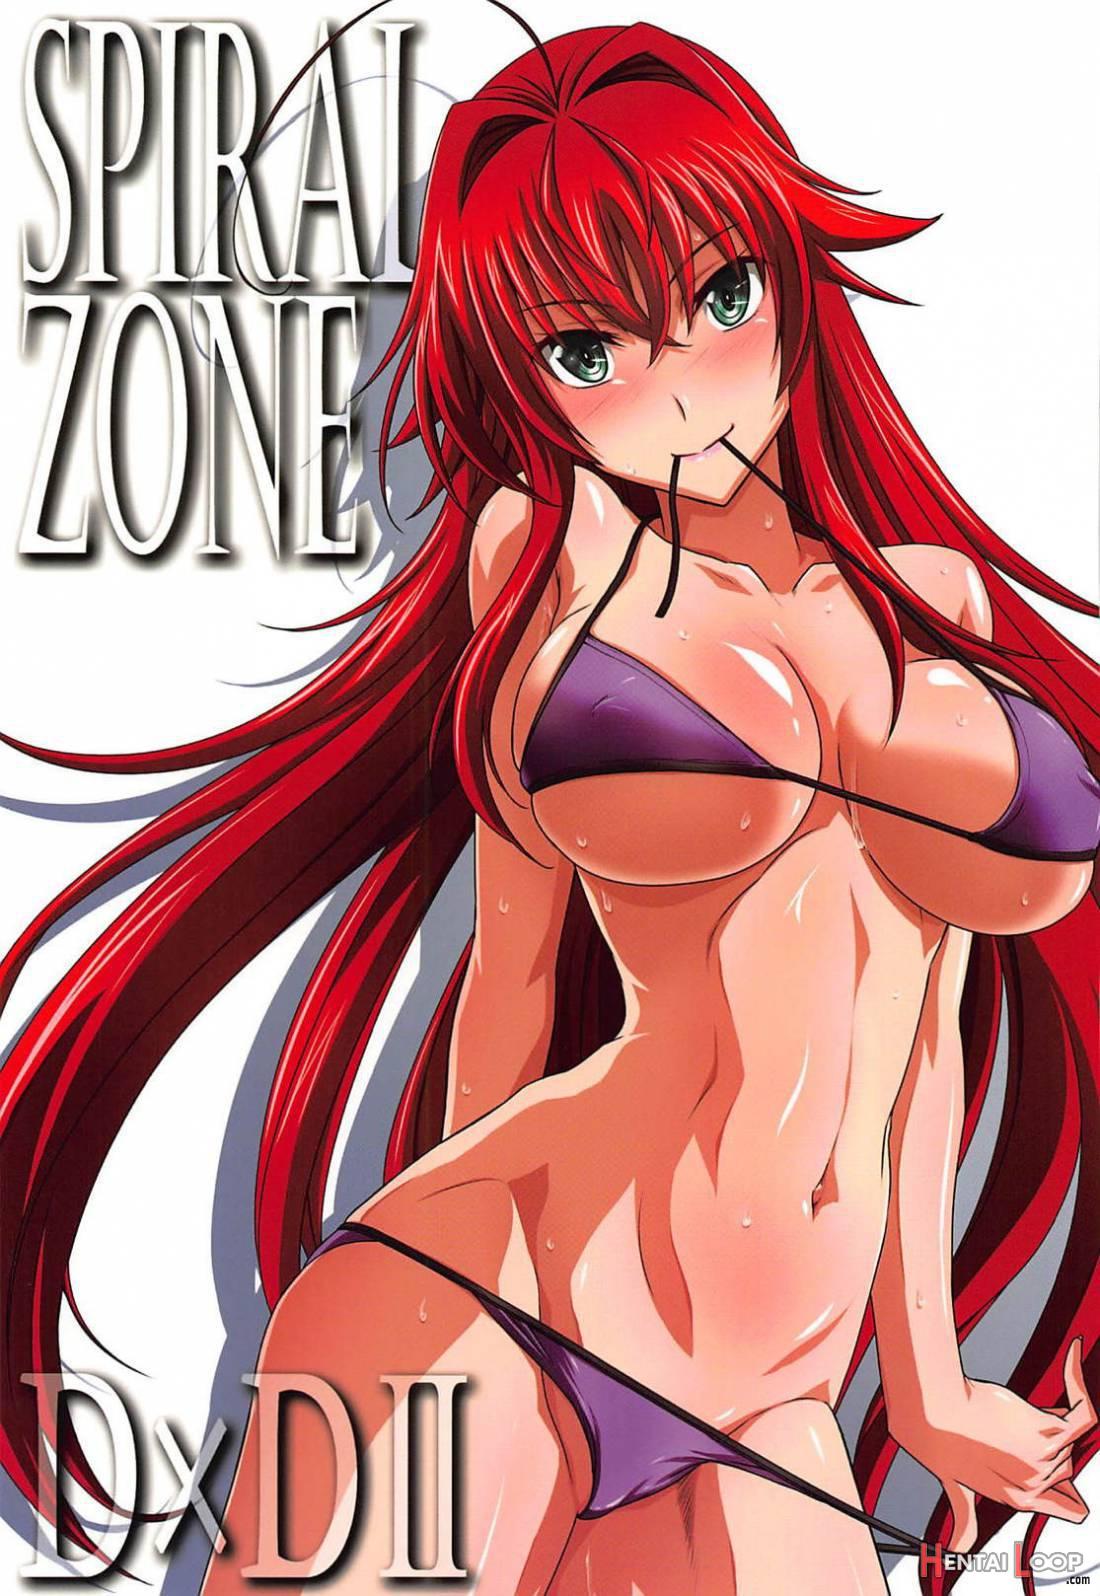 SPIRAL ZONE DxD II page 1